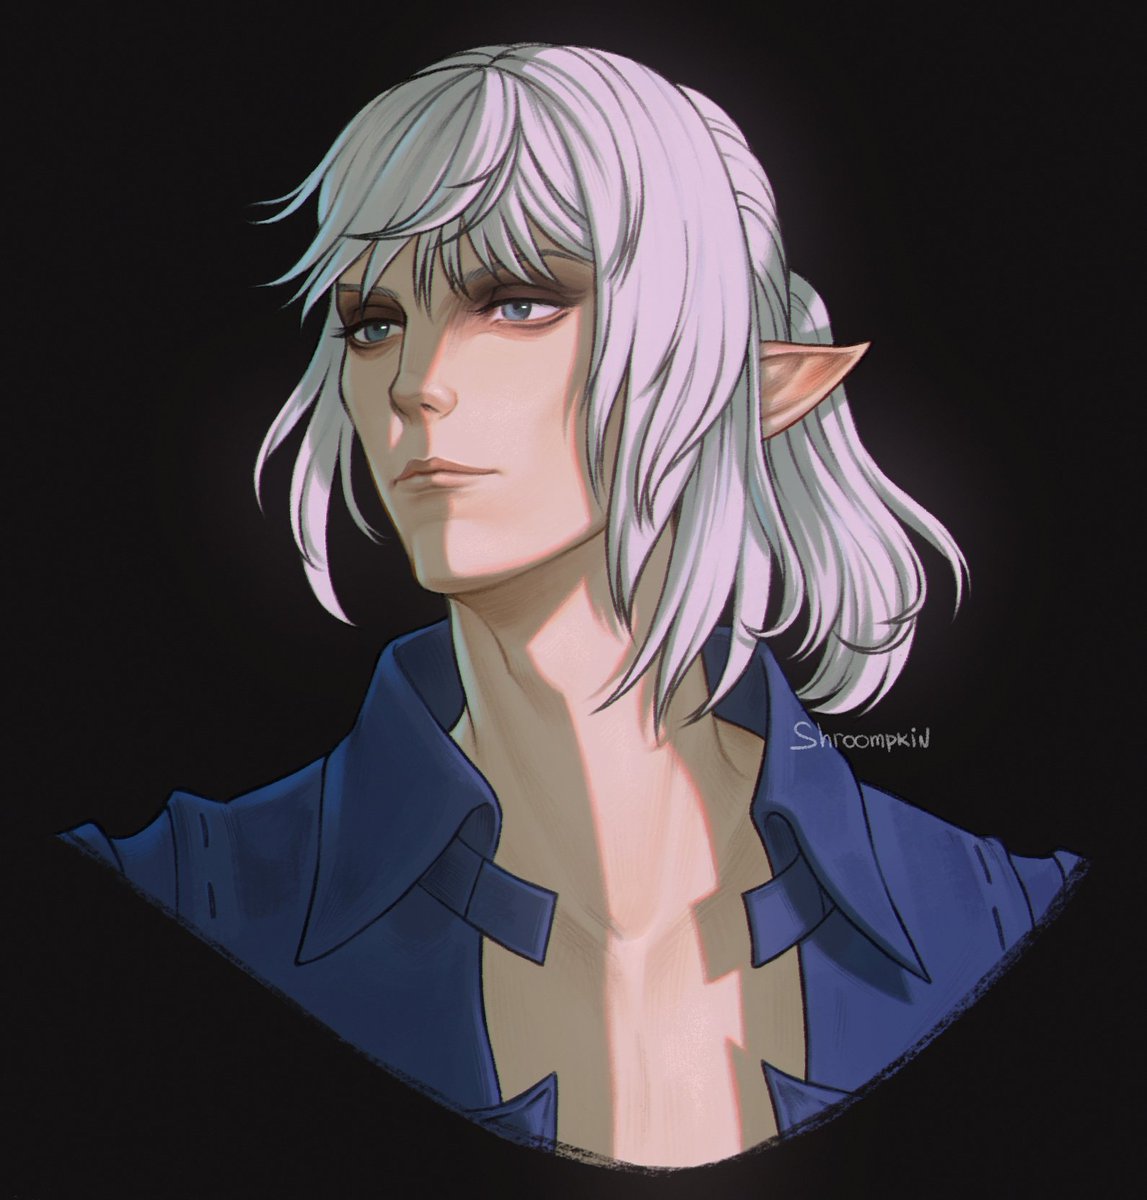 today i bring you the portrait of Estinien. tomorrow... who knows